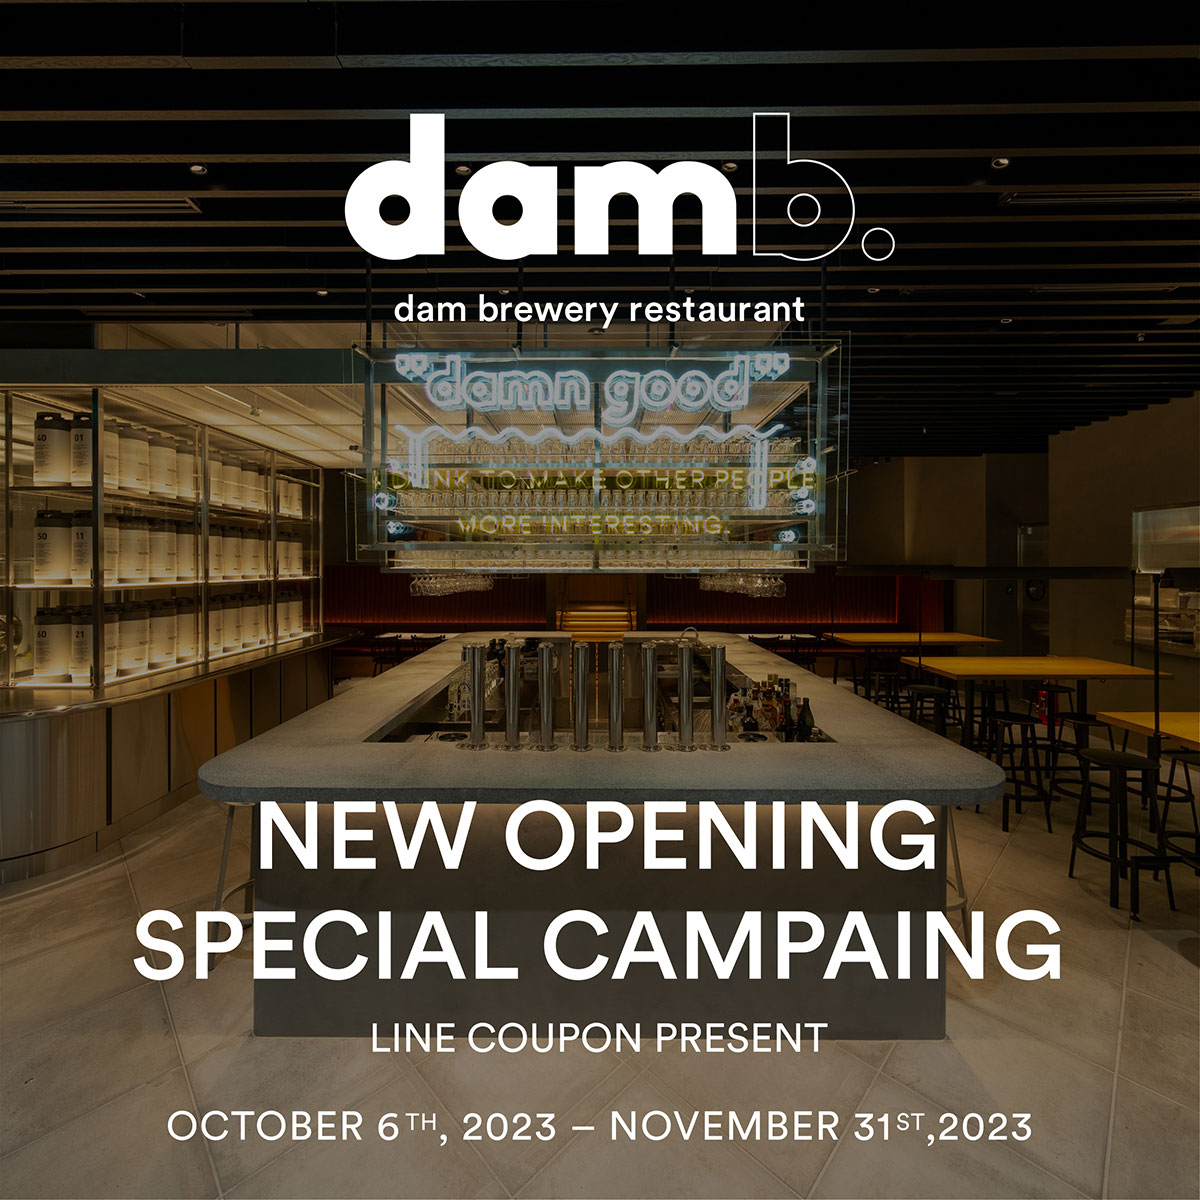 dam brewery restaurant　NEW OPENING SPECIAL CAMPAING　LINE COUPON PRESENT　OCTOBER 6TH,2023 - NOVEMBER 31ST,2023